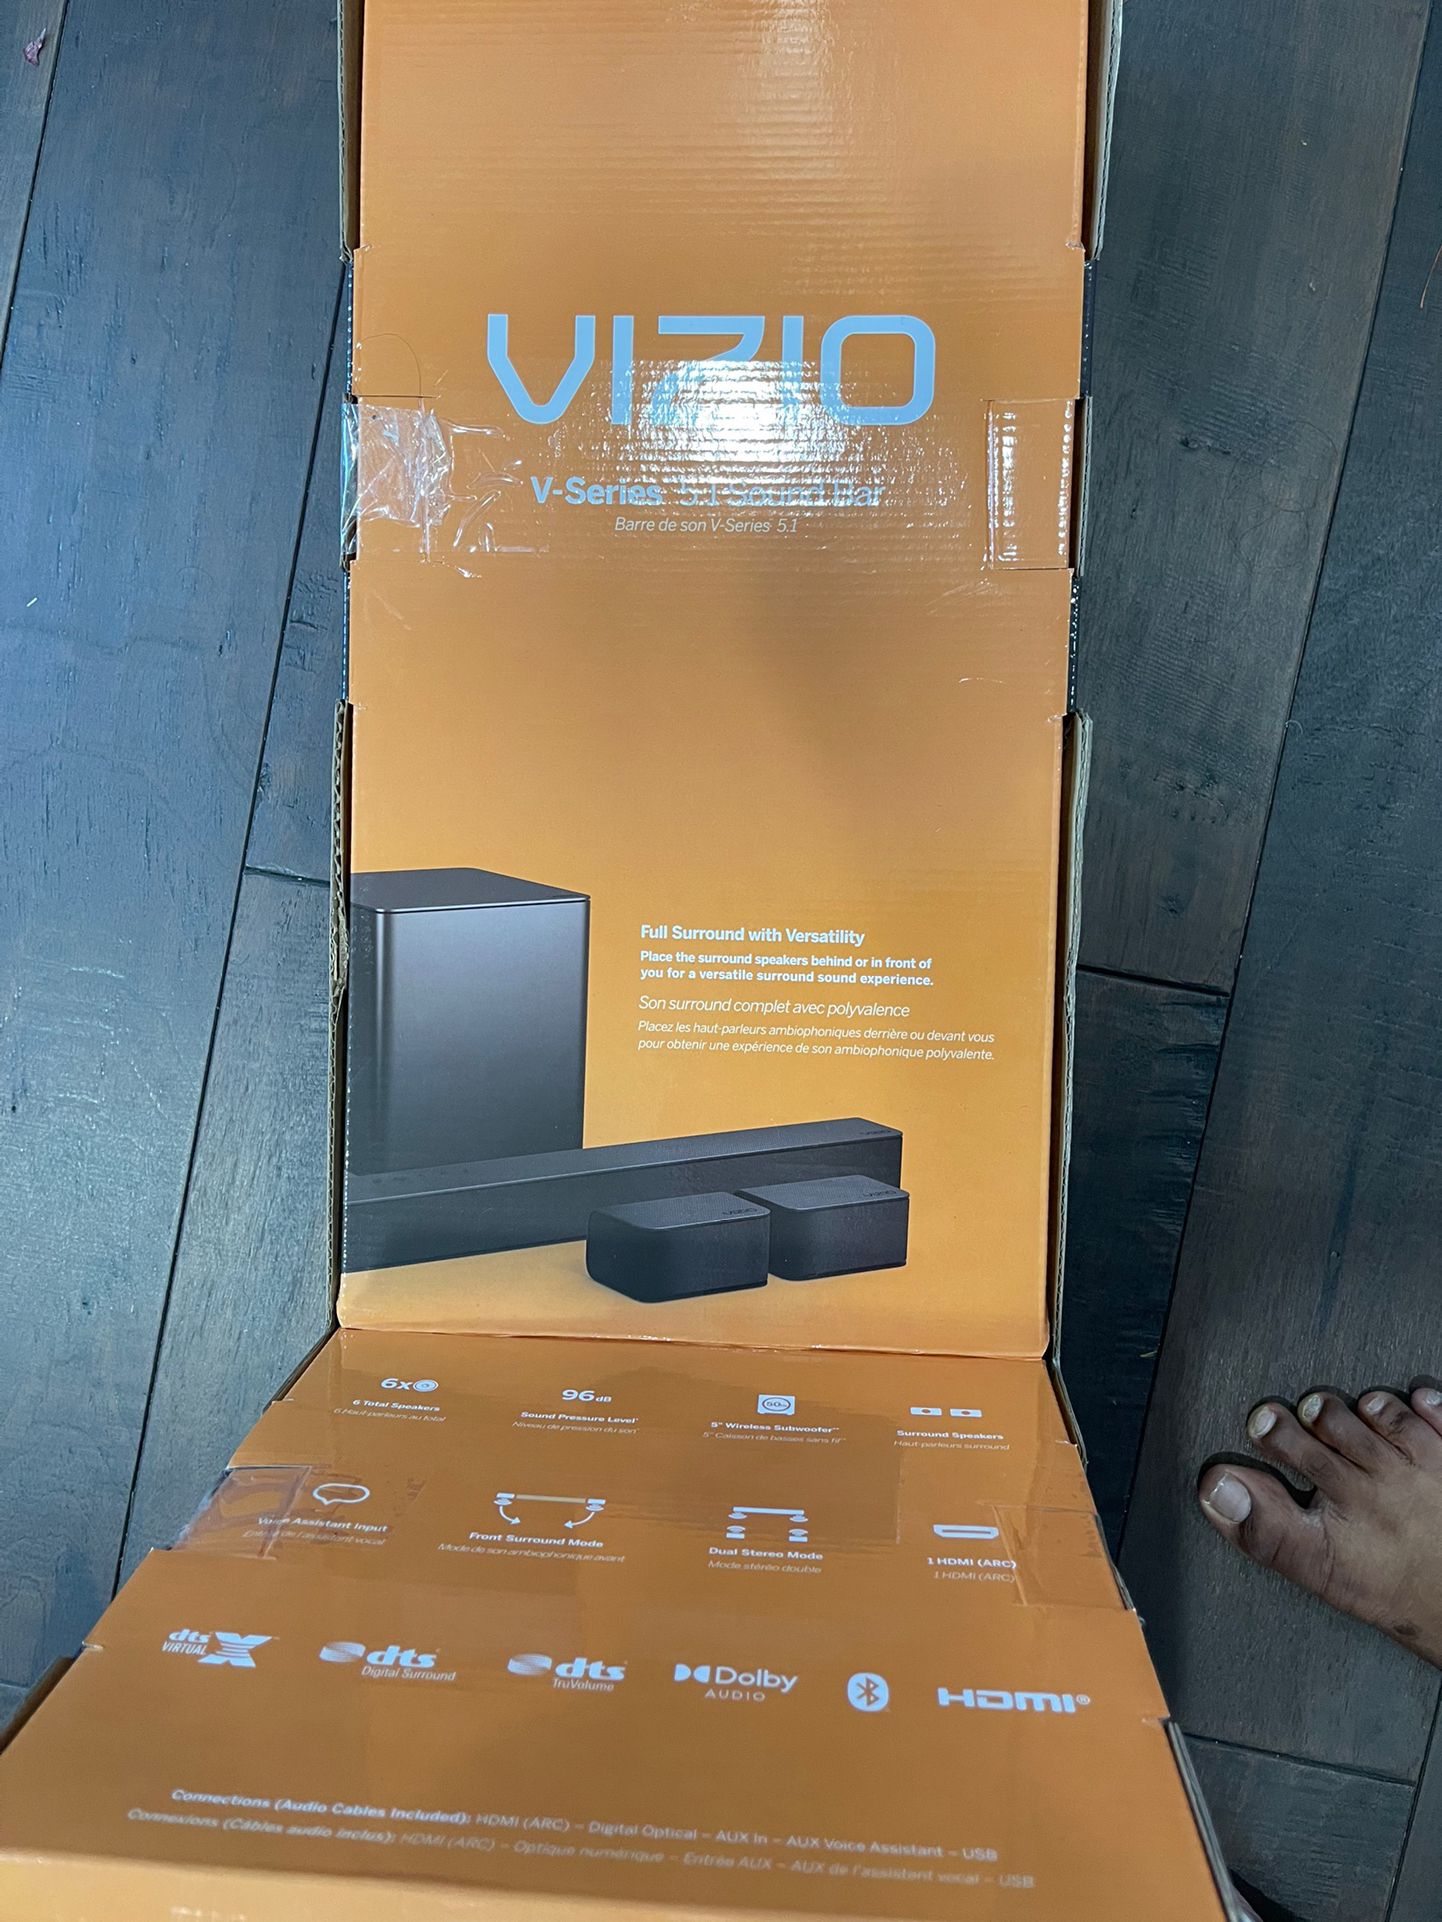 VIZIO v Series 5.1 Sound Bar and Subwoofer for Sale in Virginia Beach, VA  OfferUp